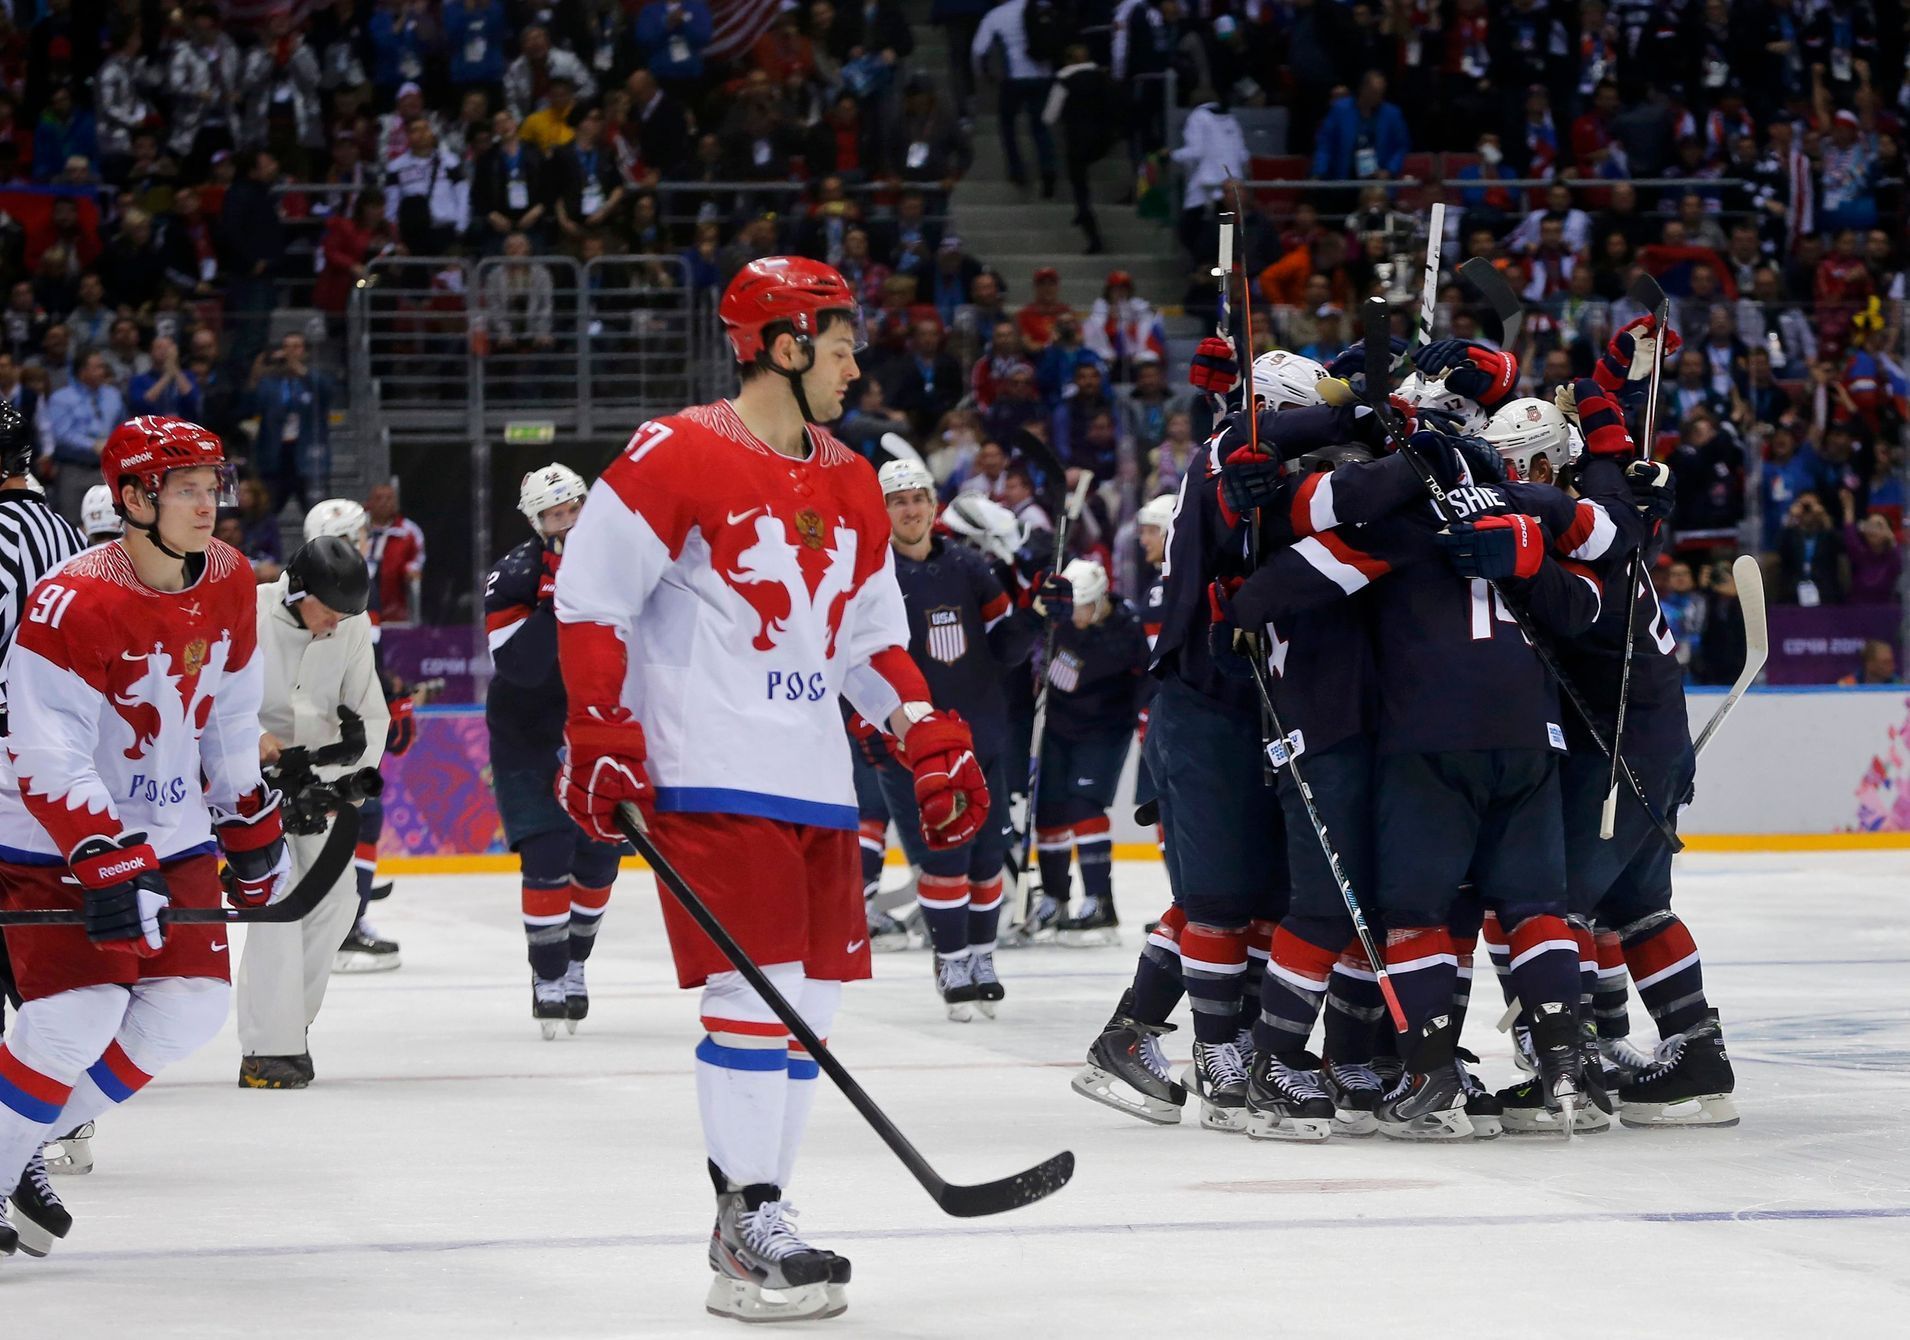 Team USA's Oshie celebrates with teammates next to Russia's Radulov and Tarasenko after scoring the game winning shootout goal against Russia, during their men's preliminary round hockey game at the S